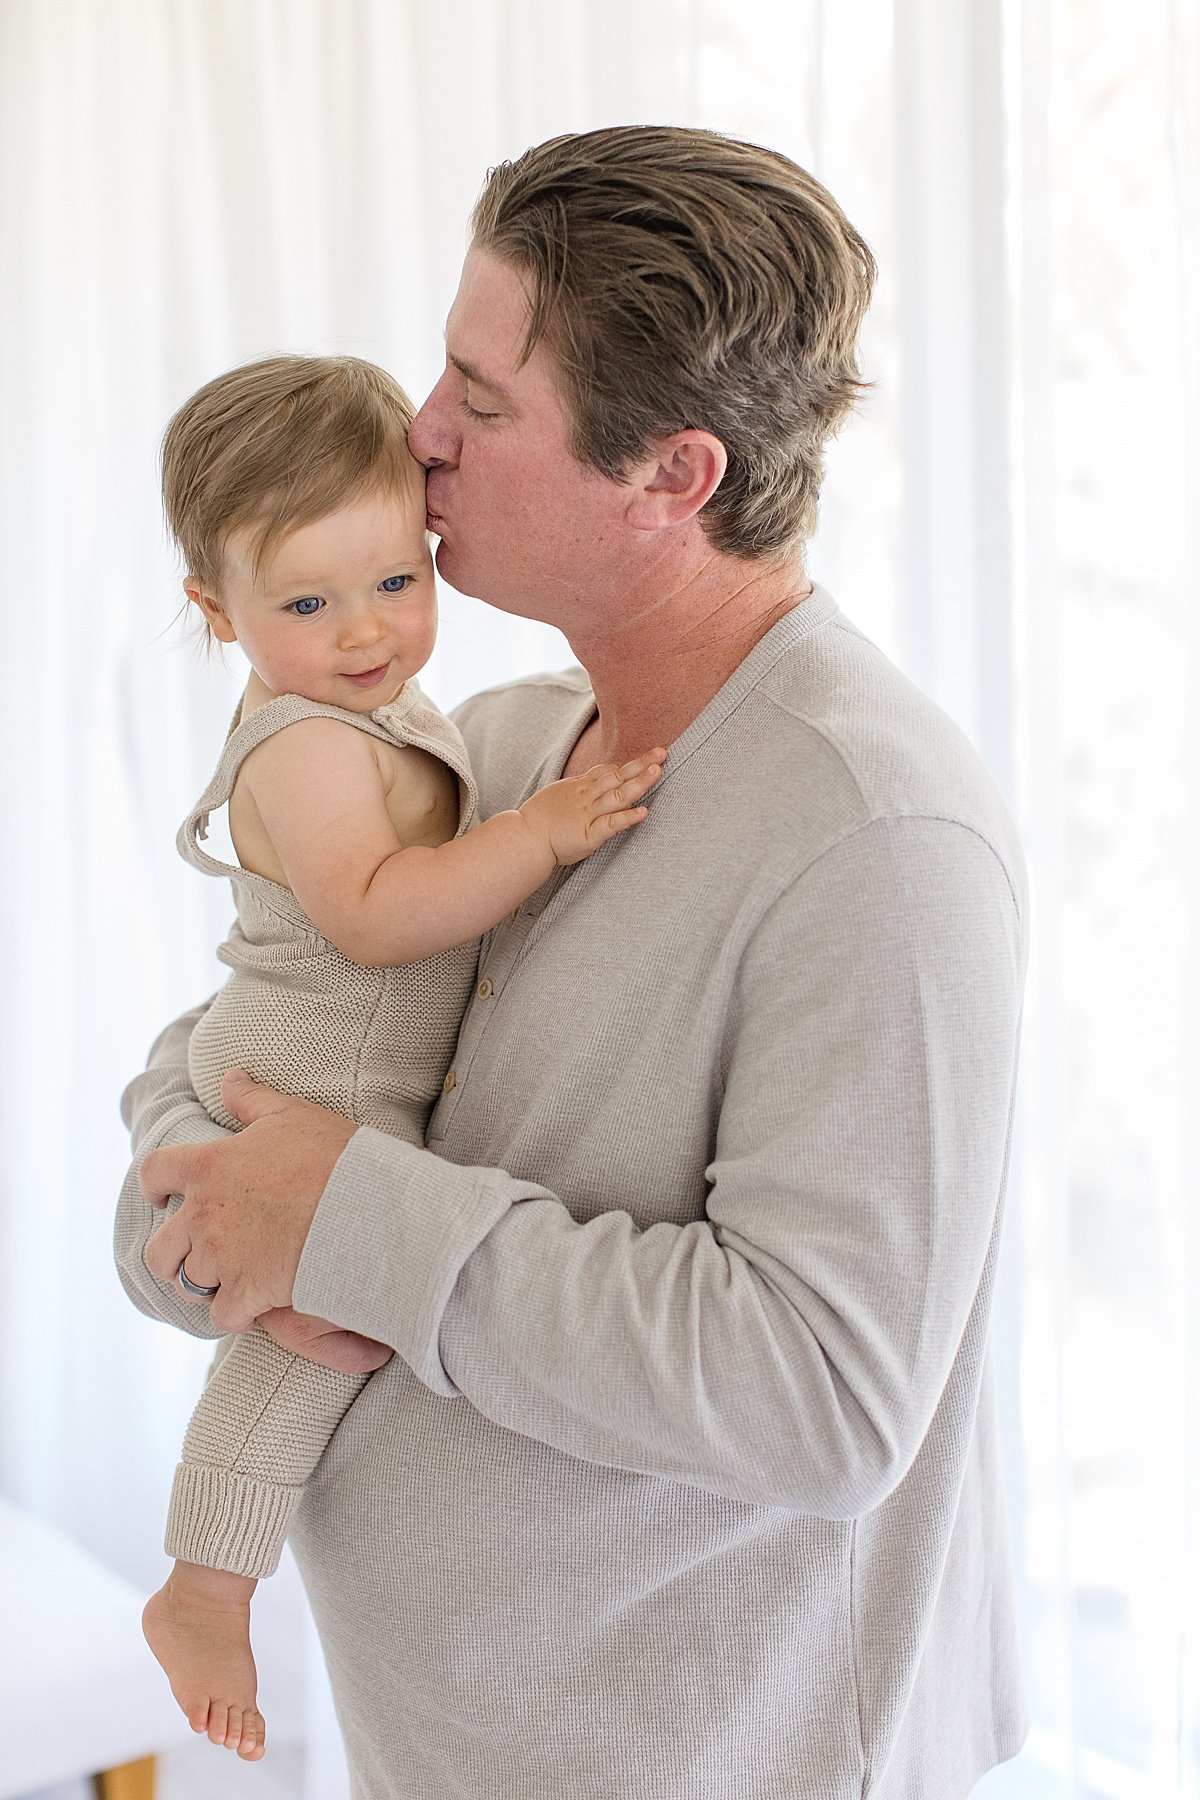 Dad kissing his son during his first birthday photo session | Newport Beach Photographer Ambre Williams